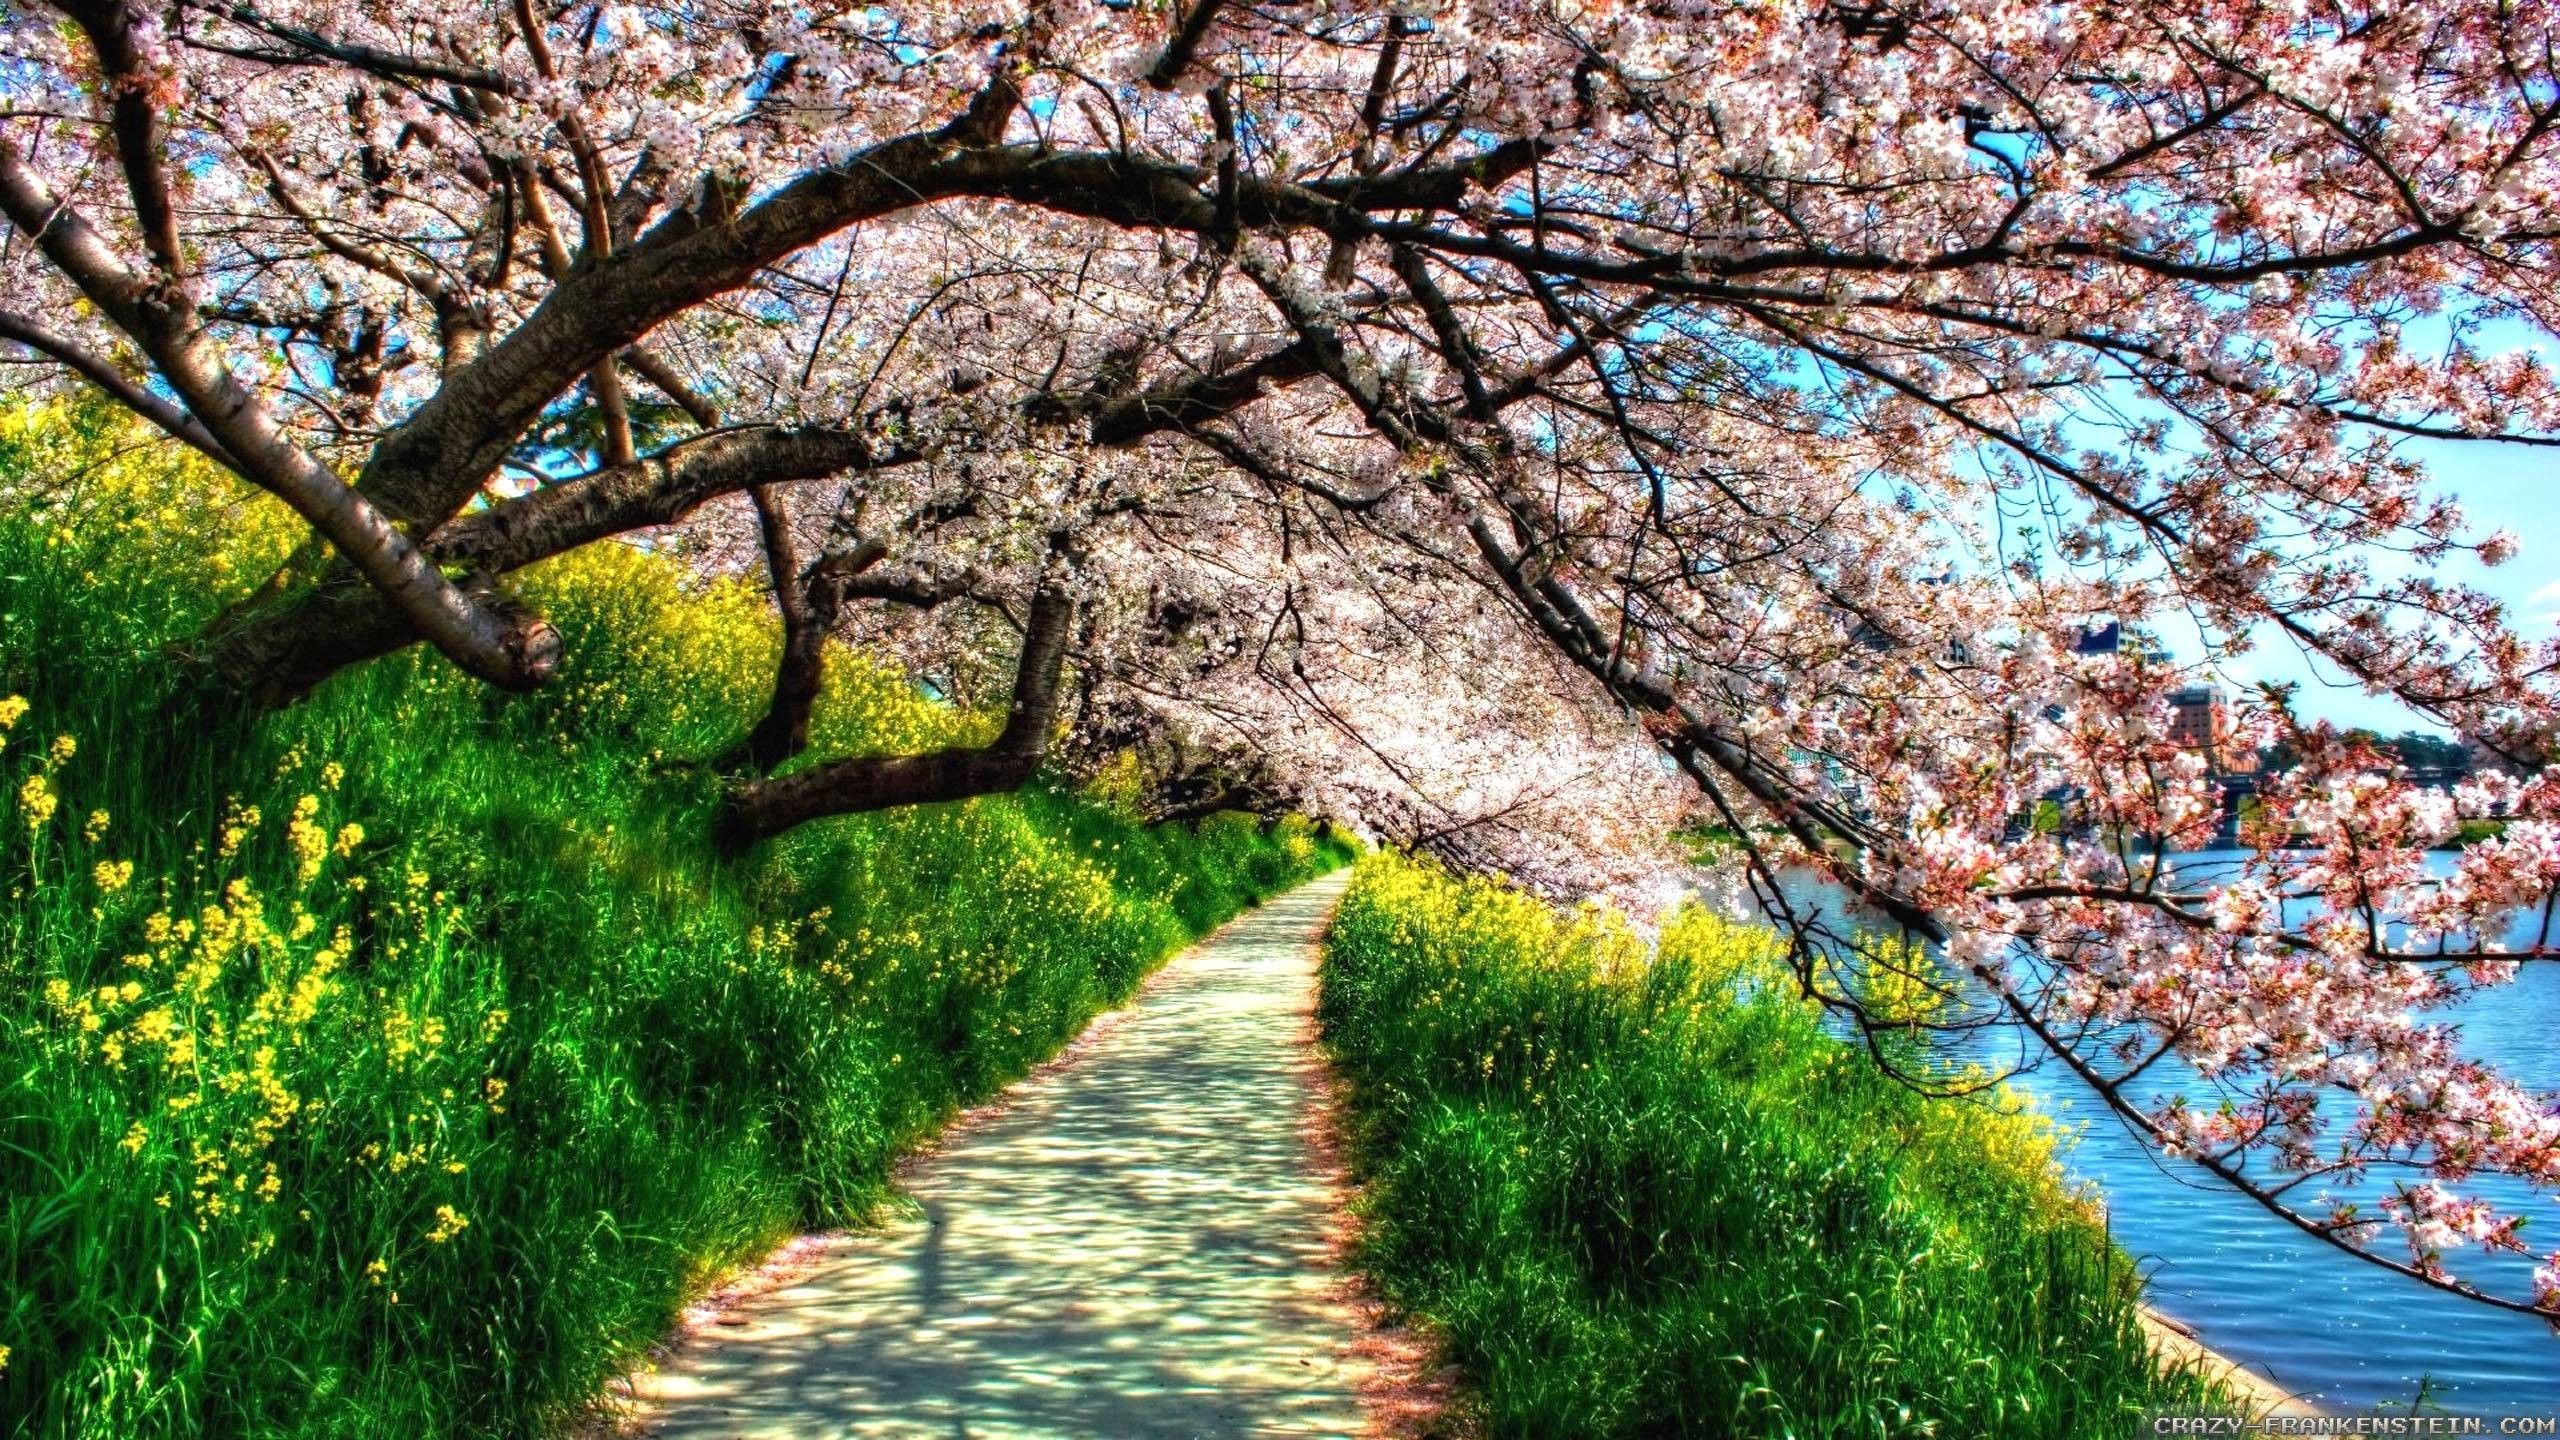 Cool Spring Backgrounds